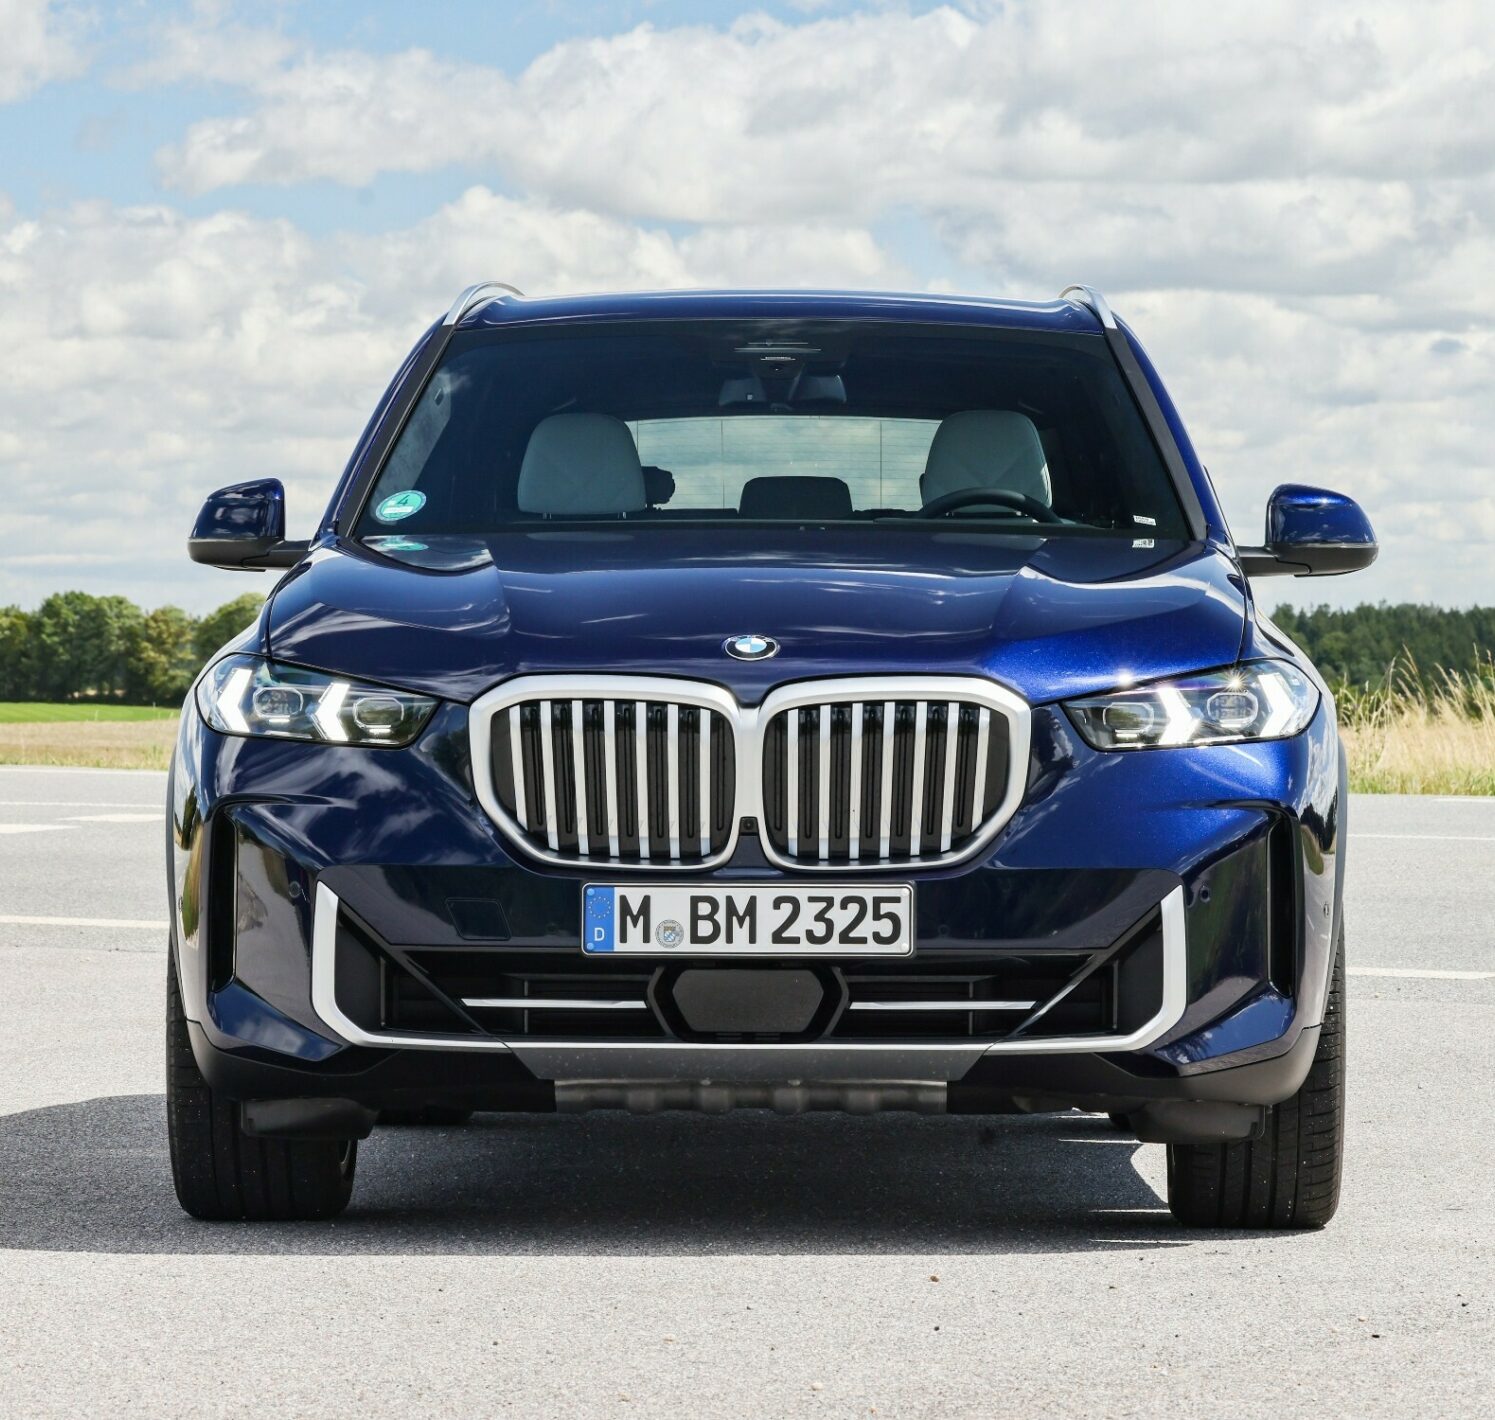 https://autofilter.sk/assets/images/x5/gallery/P90518117_lowRes_the-new-bmw-x5-08-23.jpg - obrazok